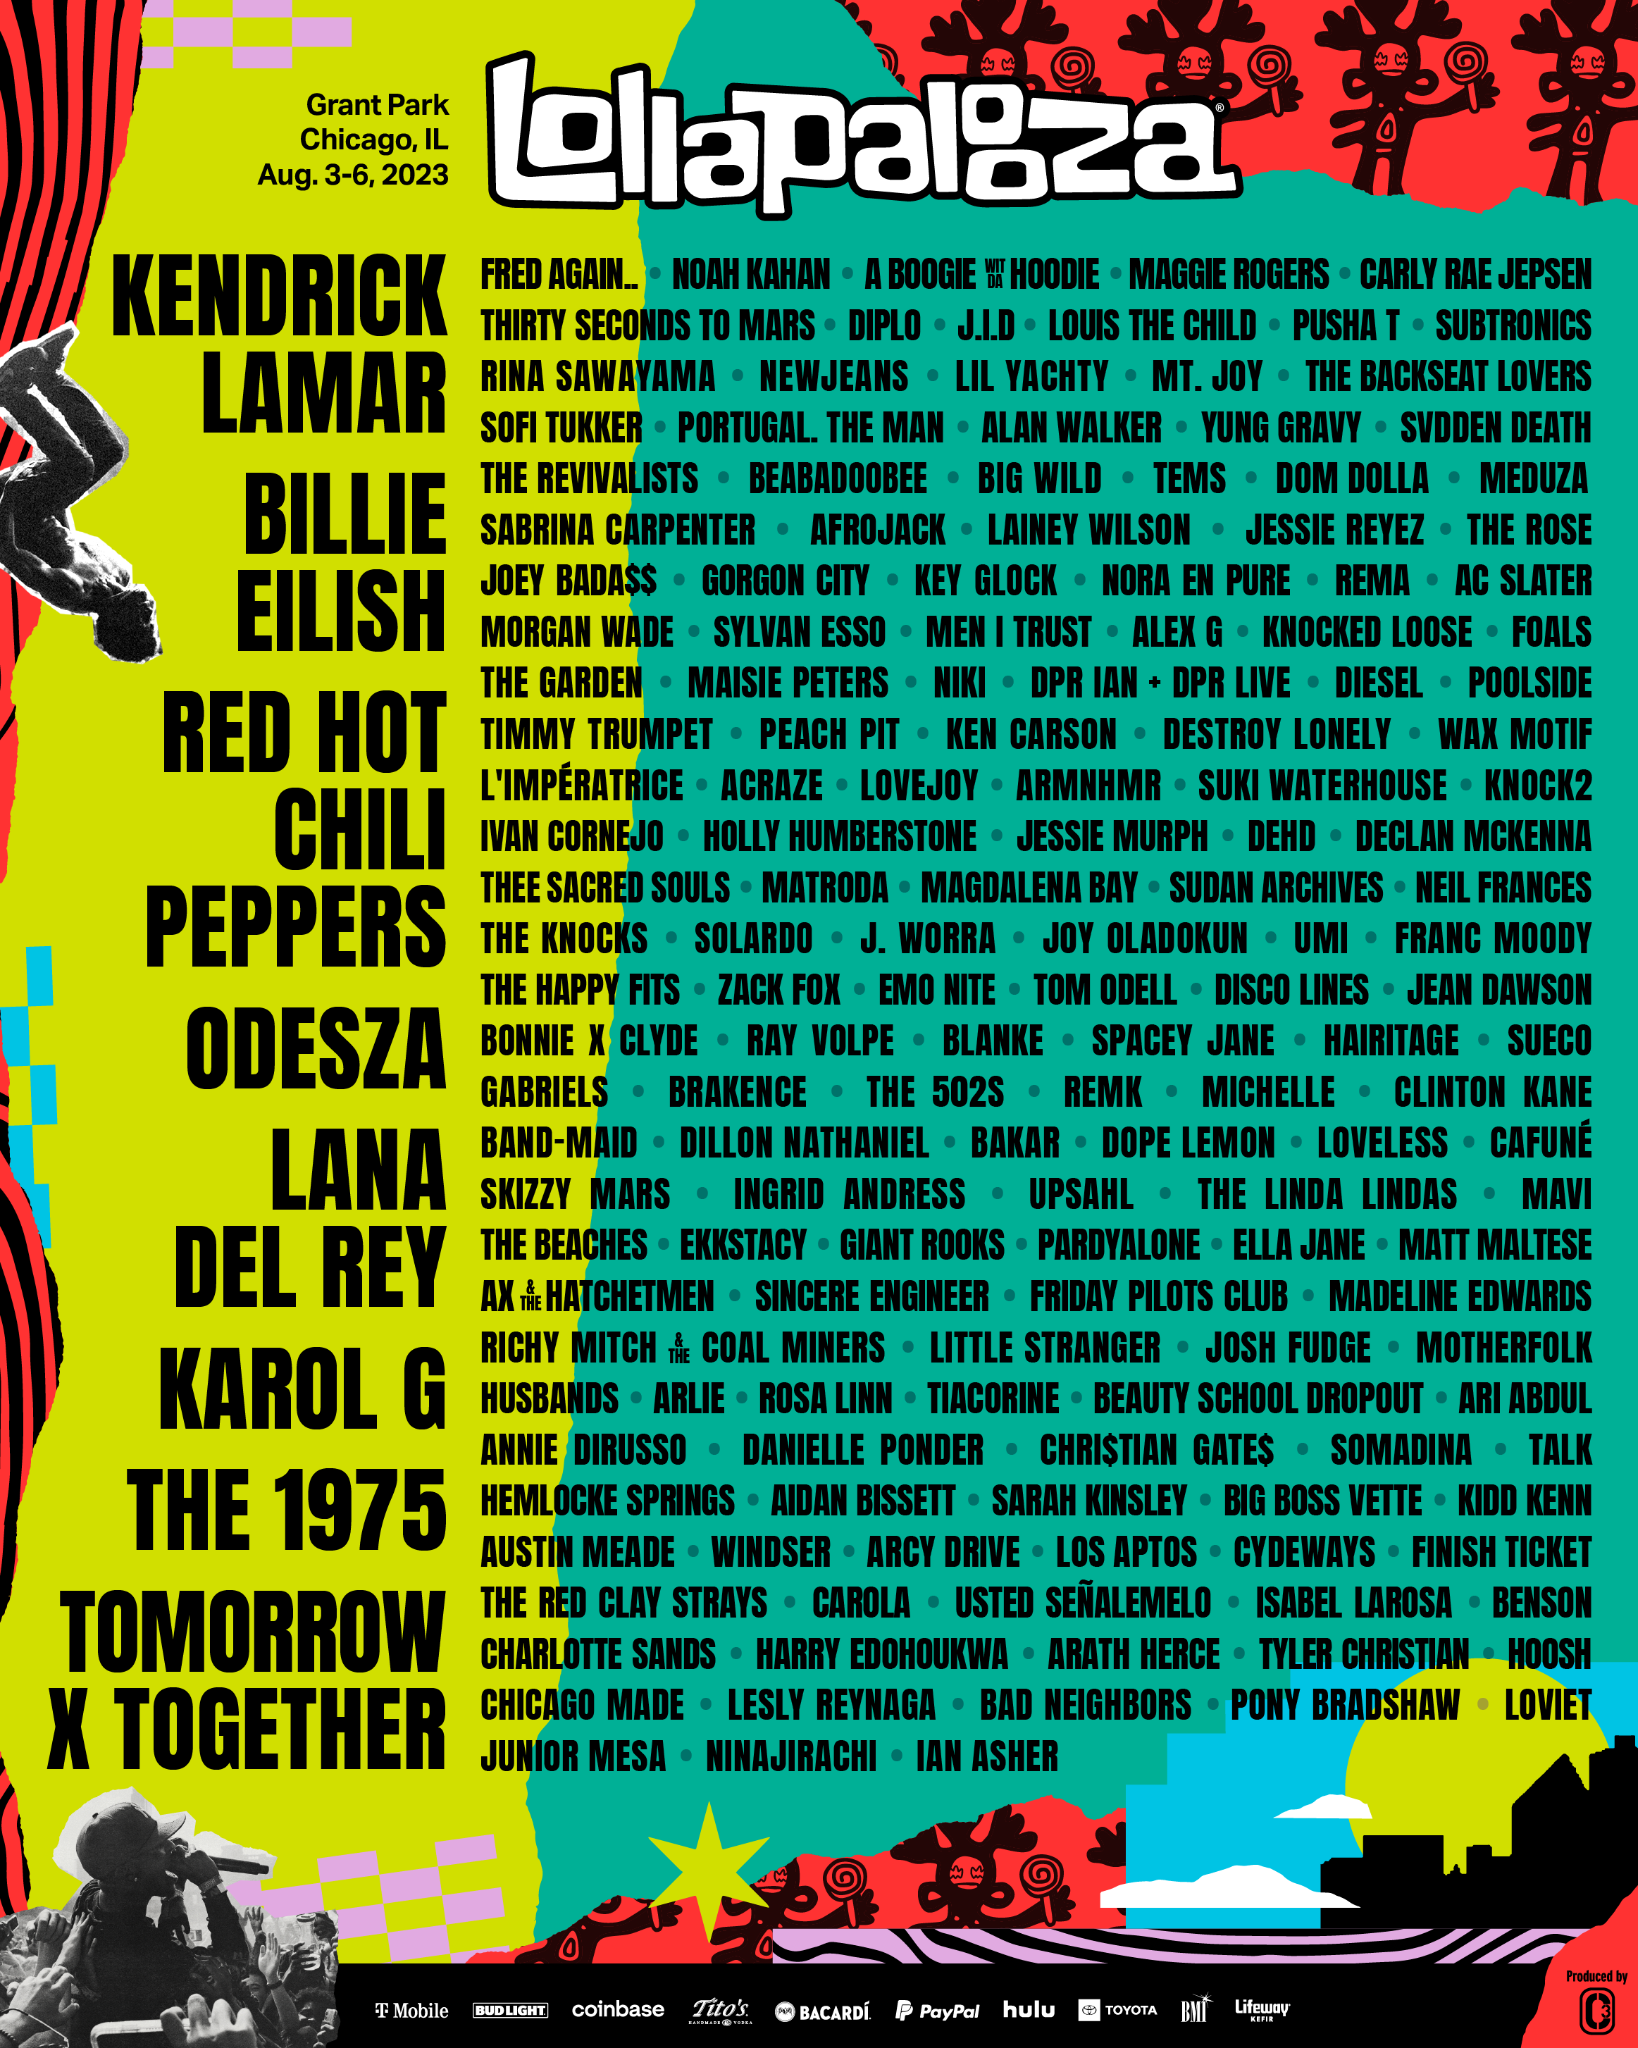 Lollapalooza 2023 lineup. Photo provided by C3 Presents.